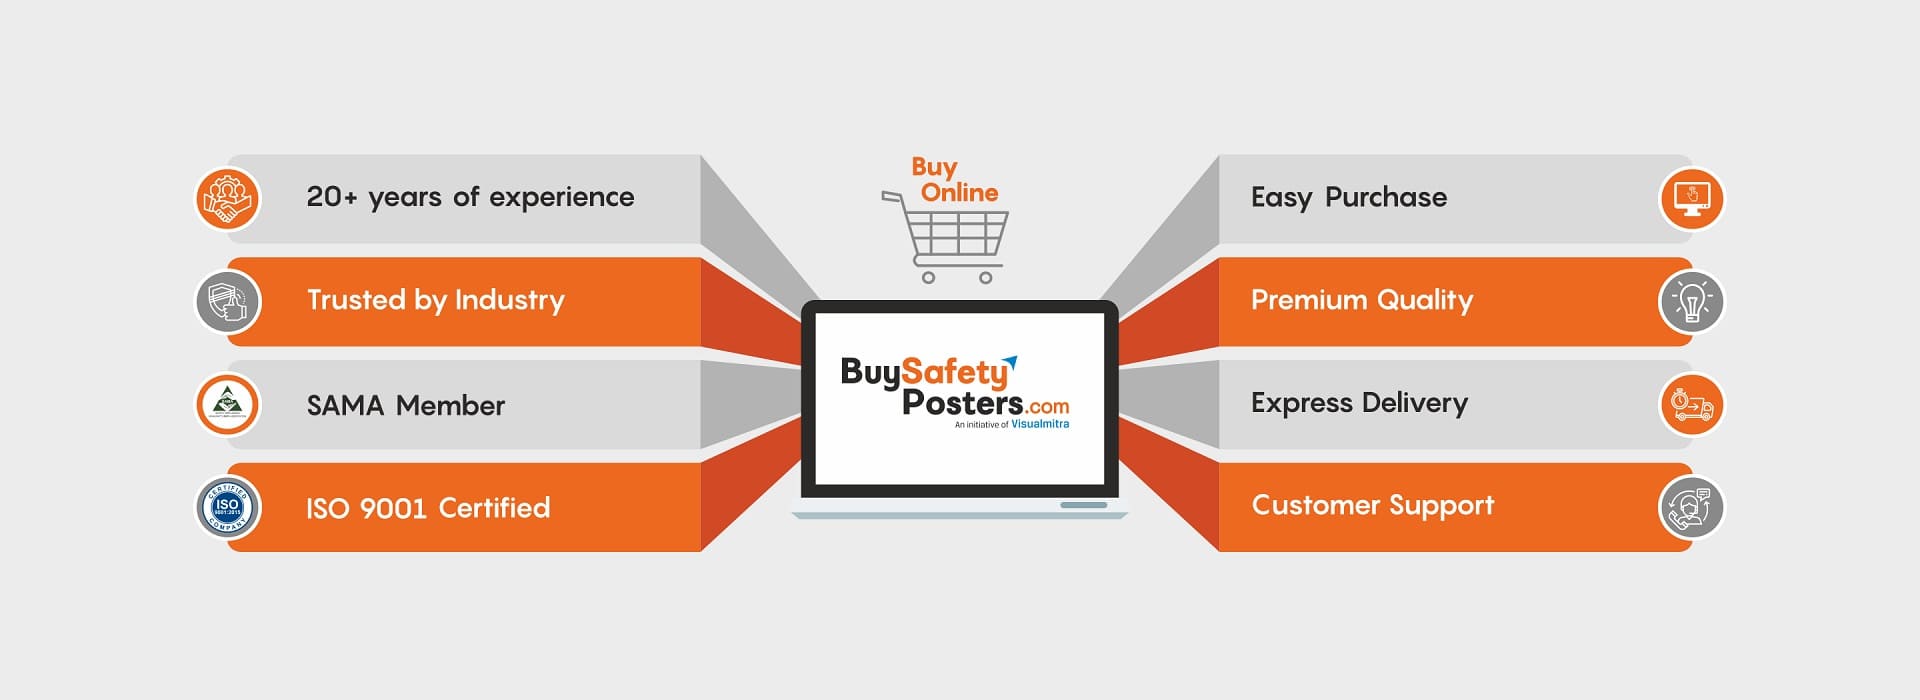 Buy Safety Posters Online - buysafetyposters.com